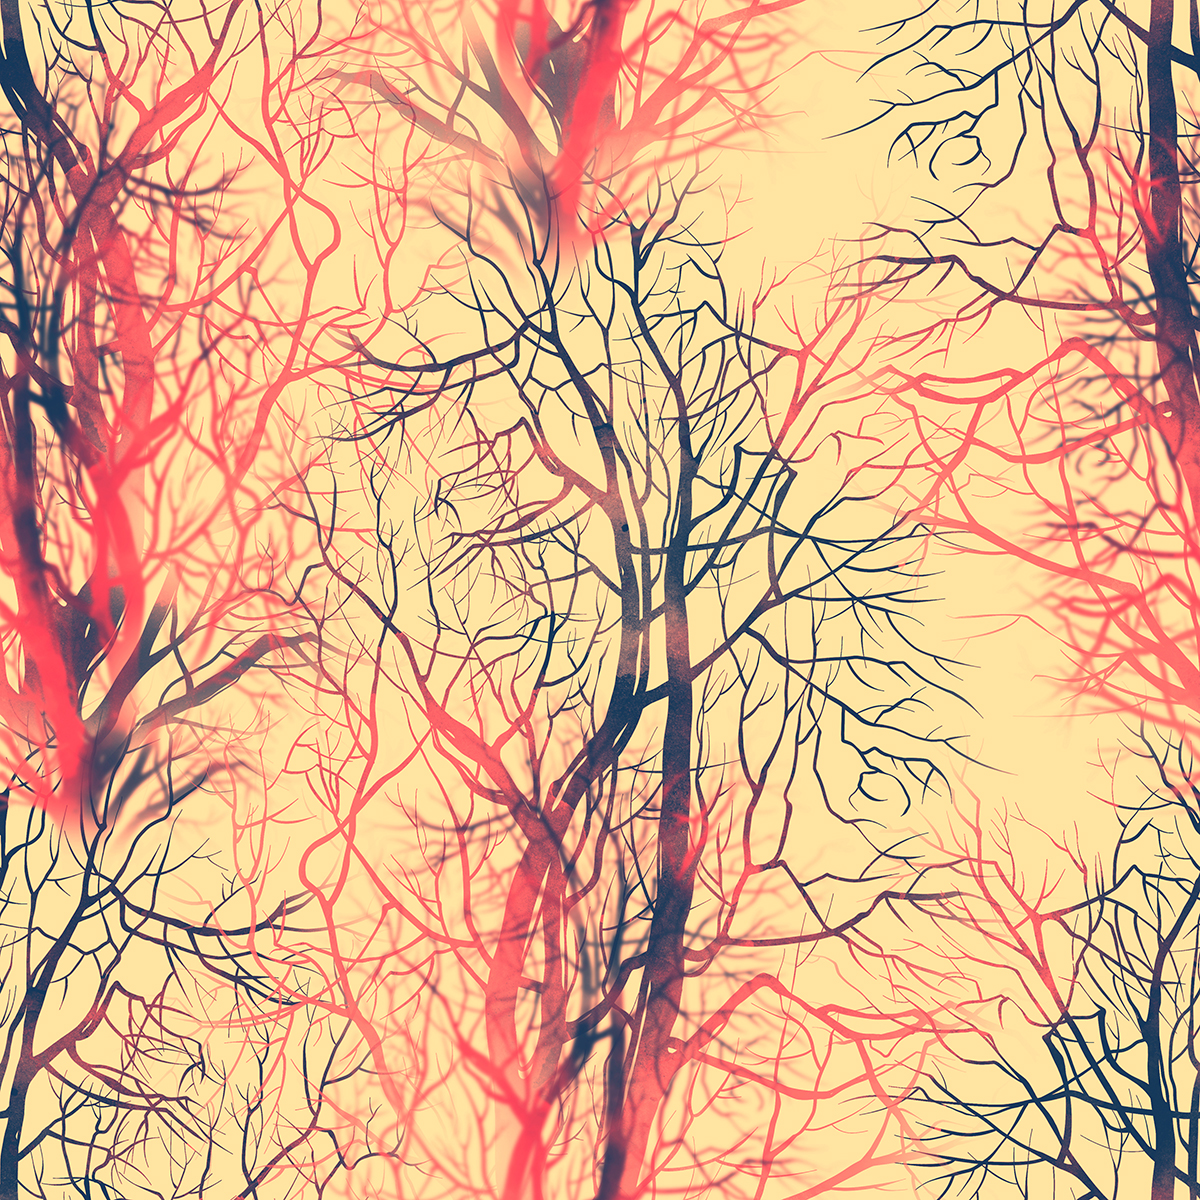 A pattern of bare trees